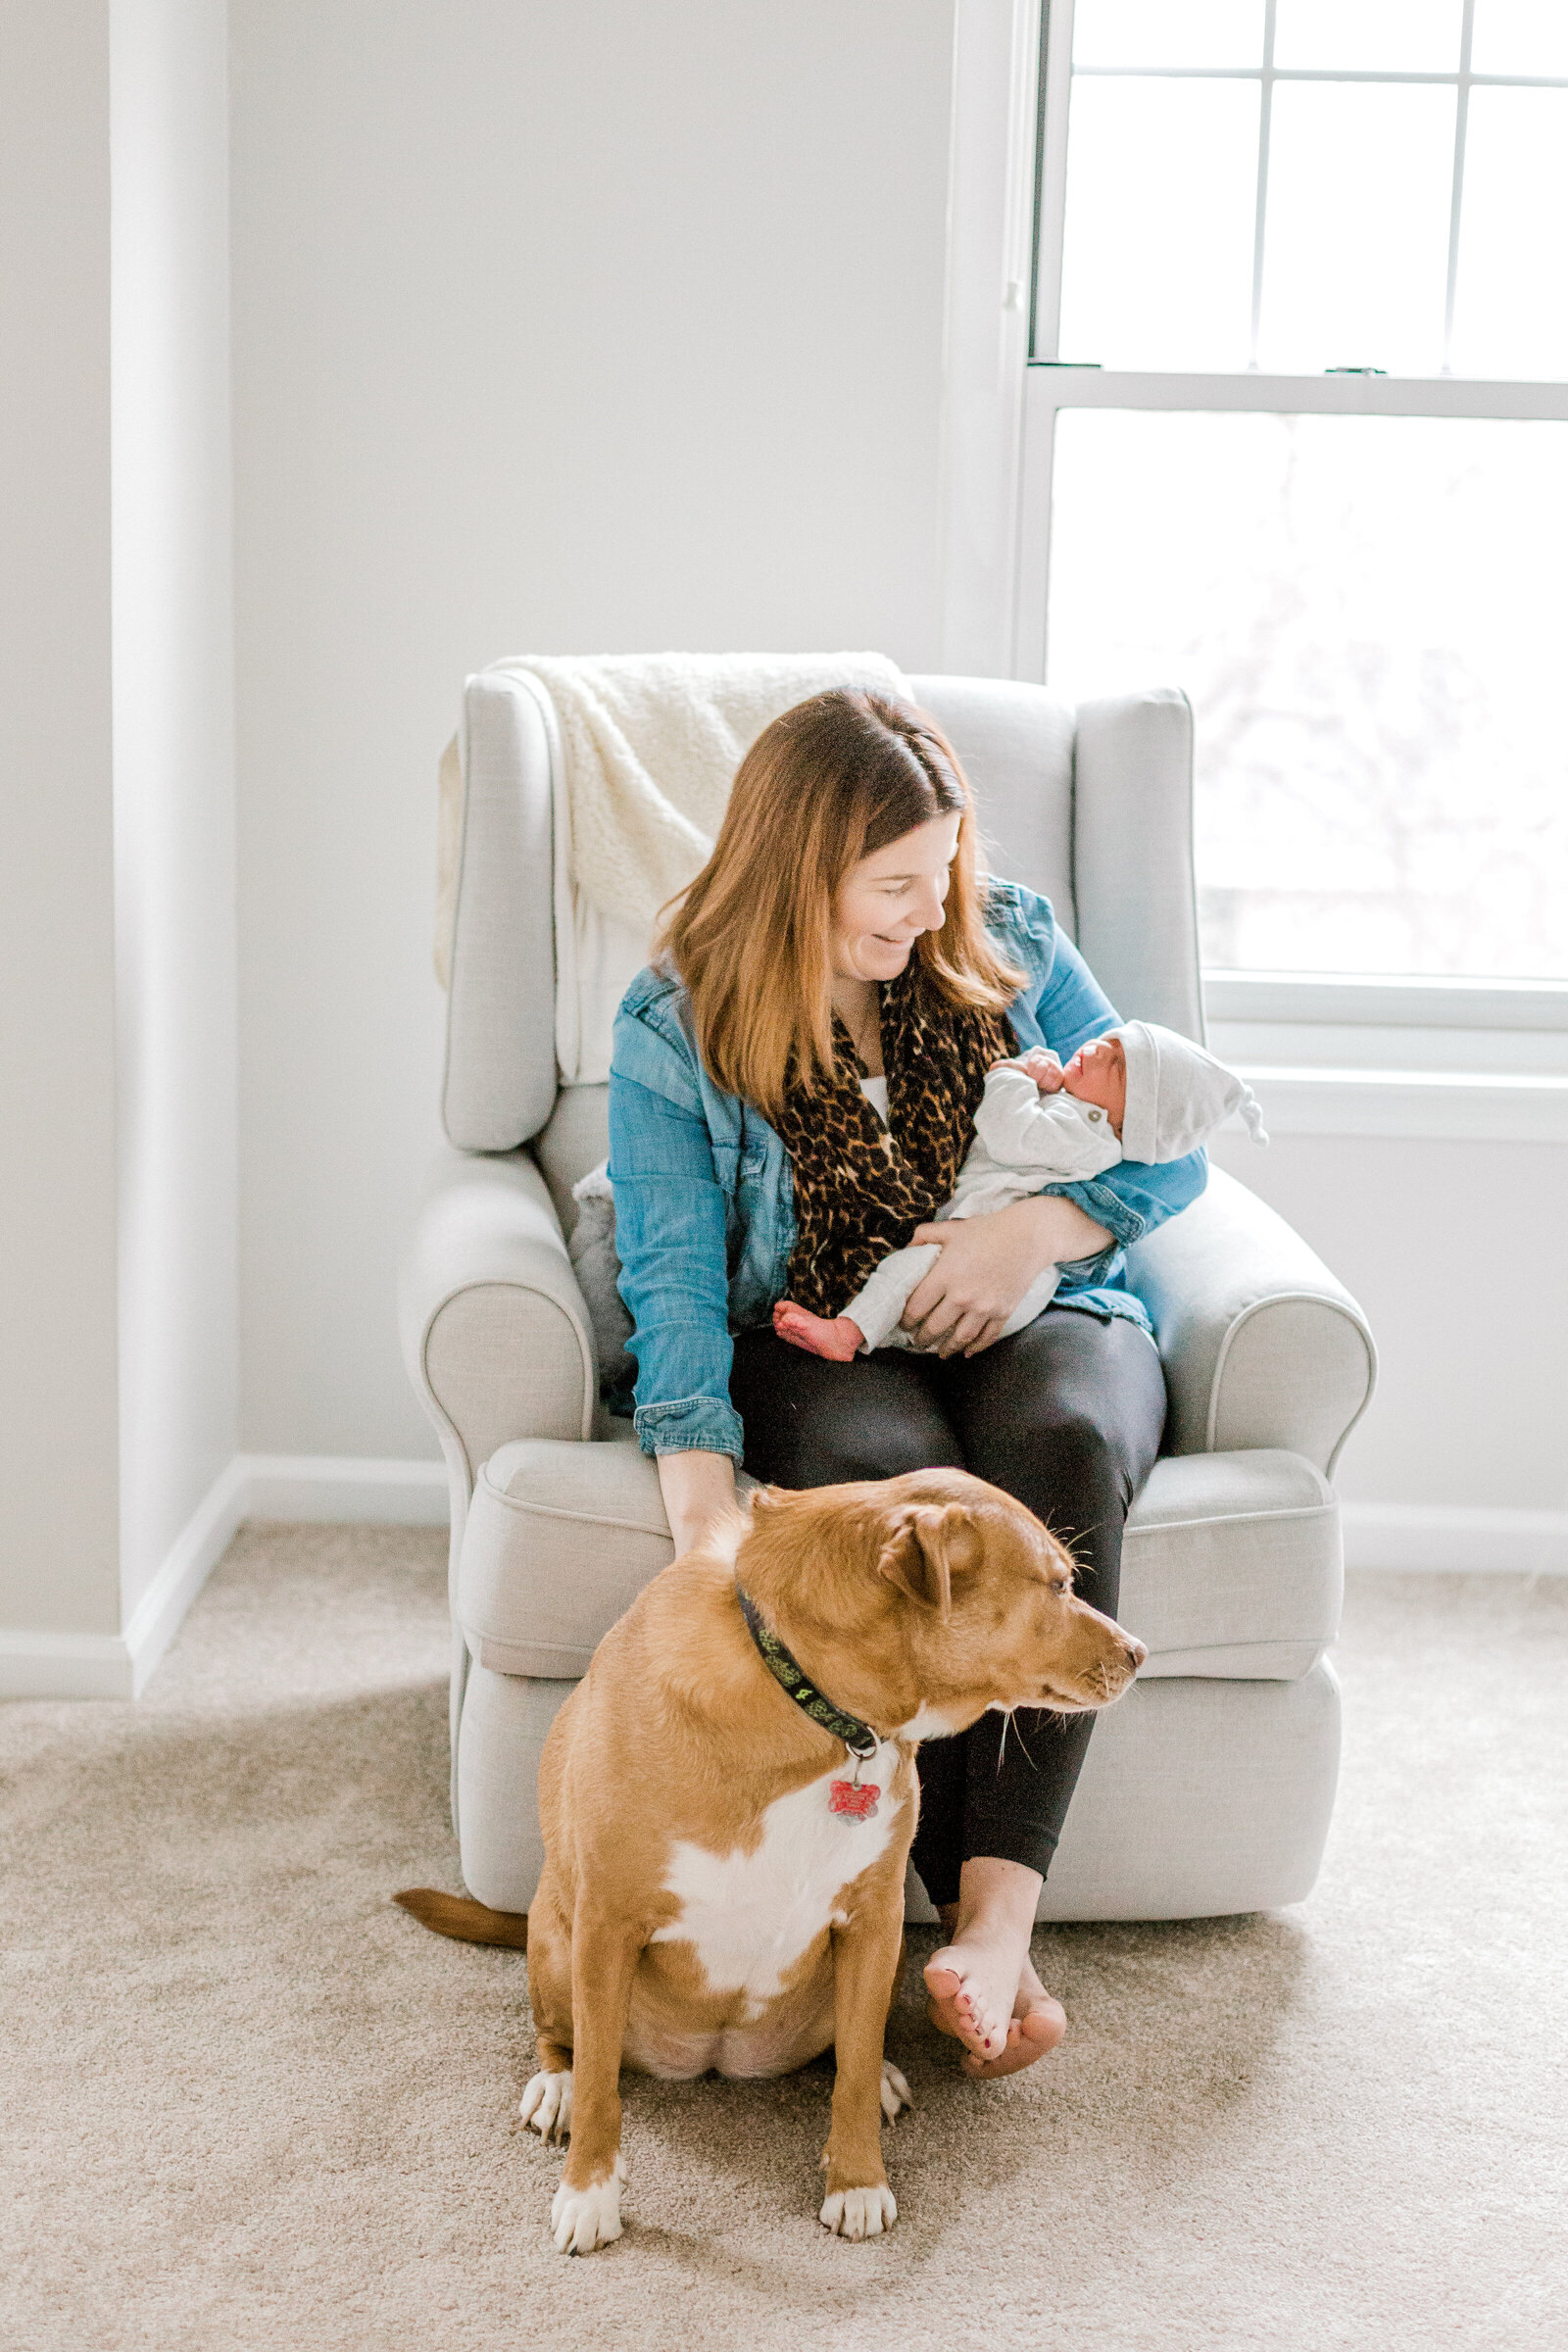 Blue Bell Pennsylvania In home newborn session with dog white and gray animal nursery wedding and lifestyle photographer Lytle Photo Co (7 of 109)